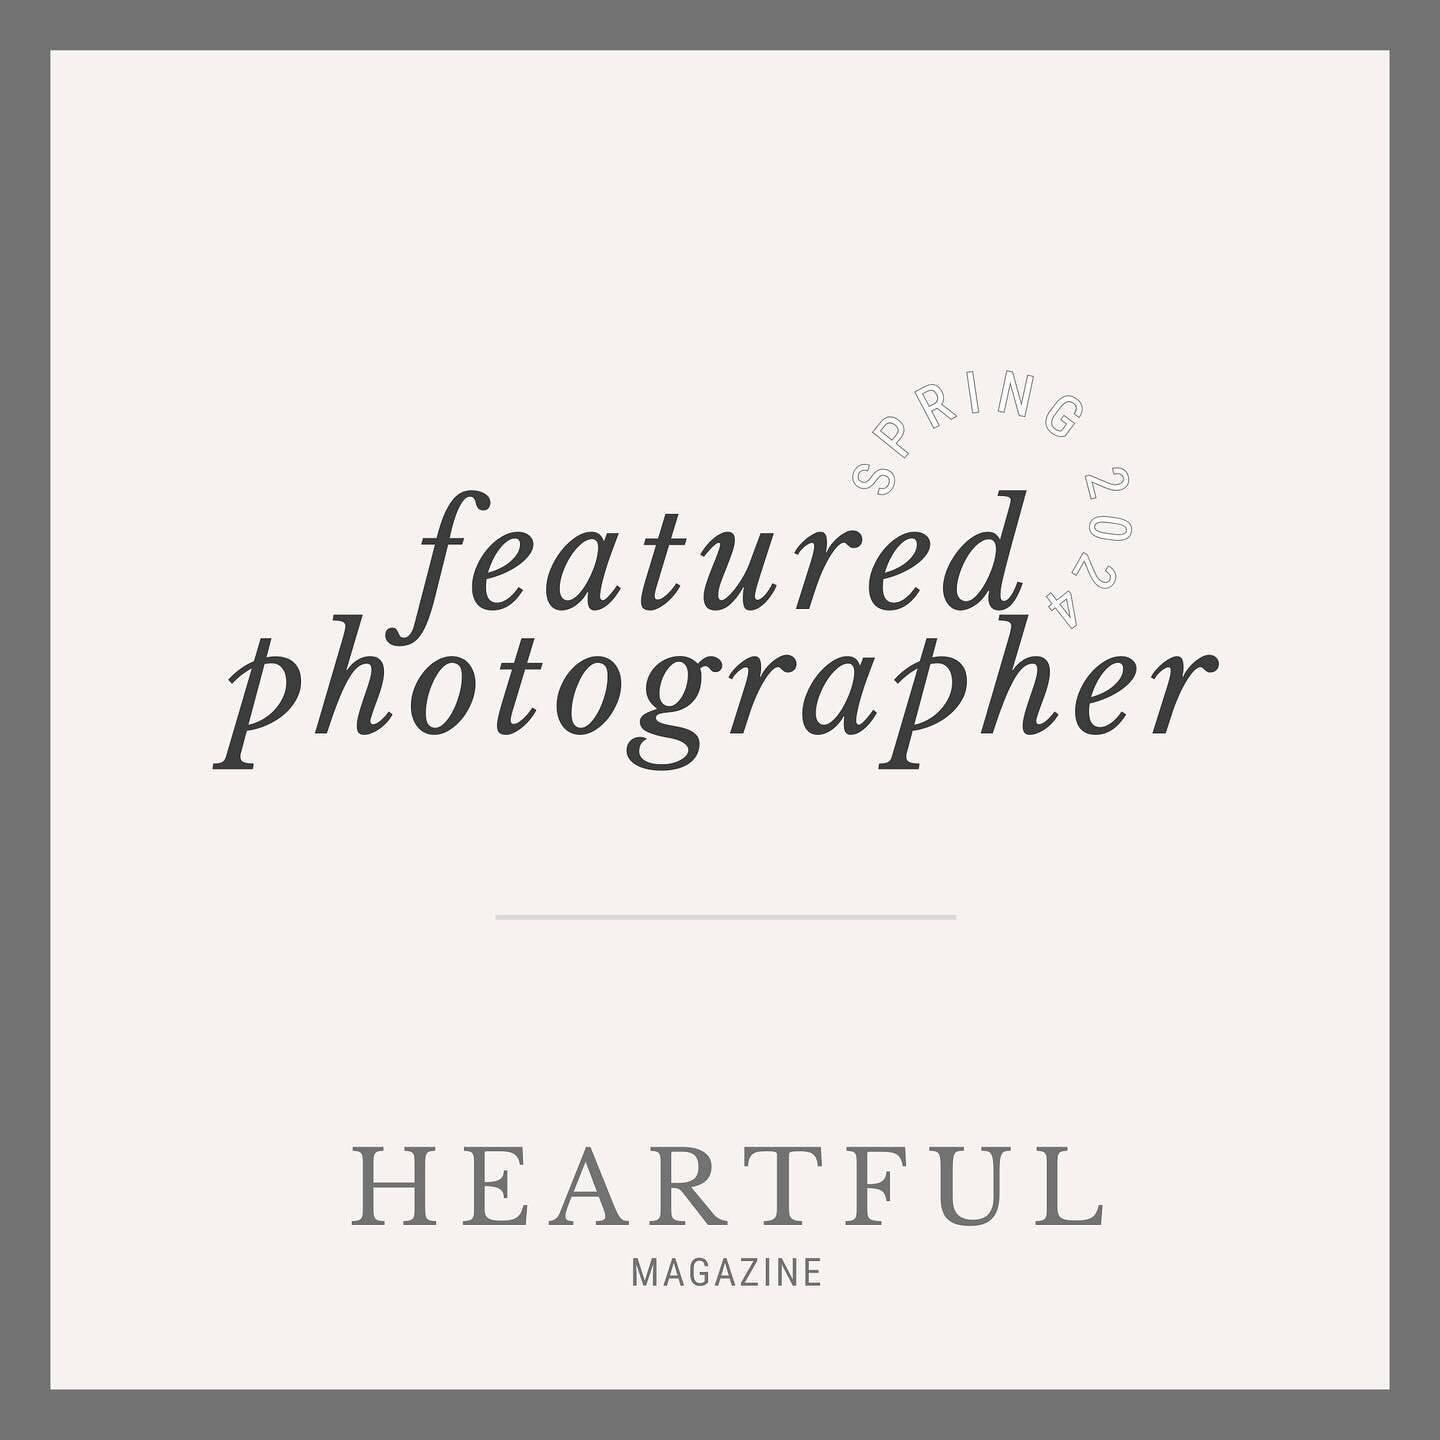 So honored to be featured amongst so many talented family photographers in the Spring Issue of @heartfulmagazine 🖤
Thank you, thank you, thank you @heartfulmagazine